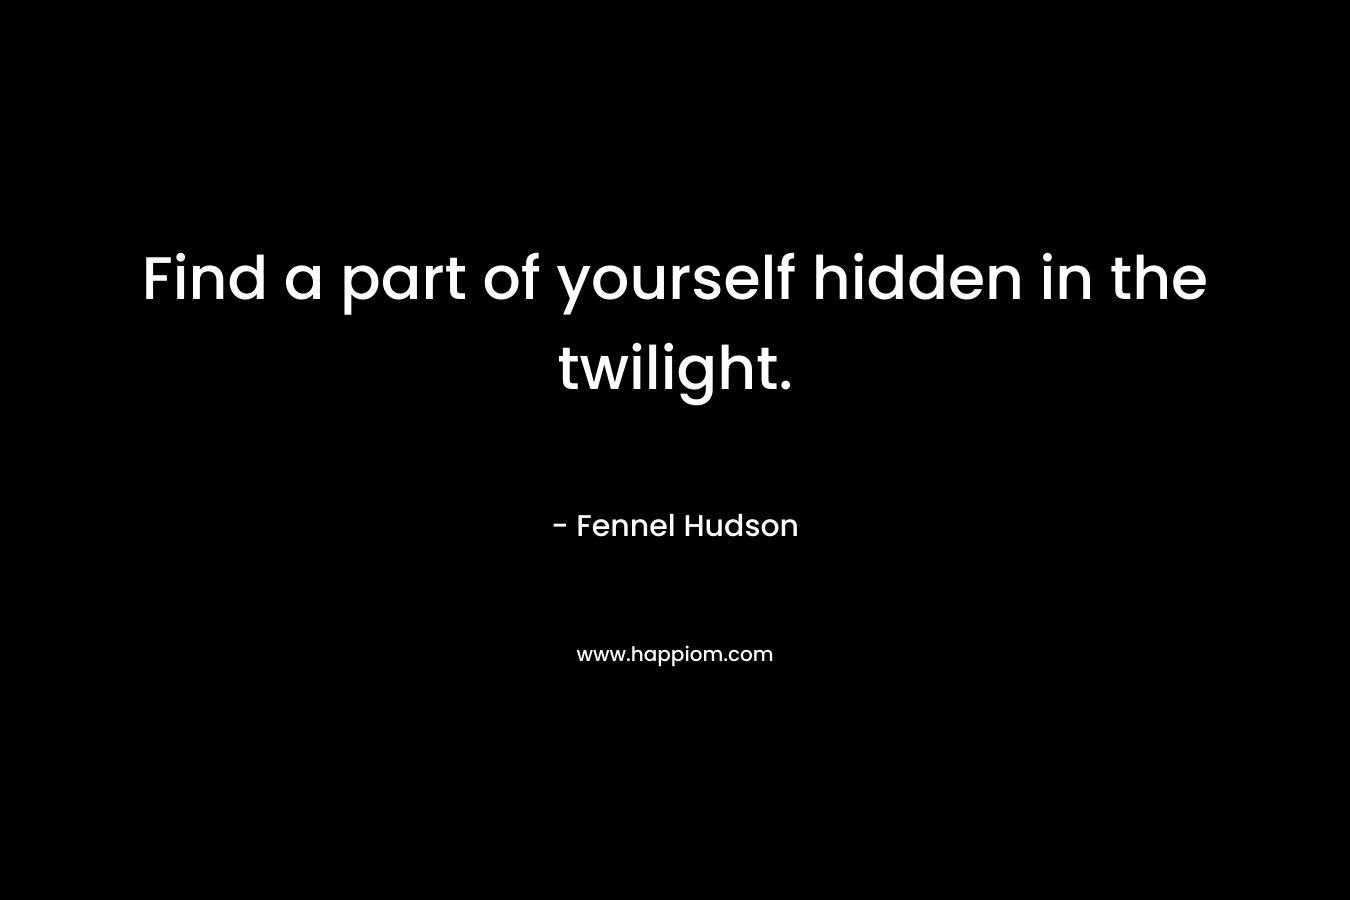 Find a part of yourself hidden in the twilight.